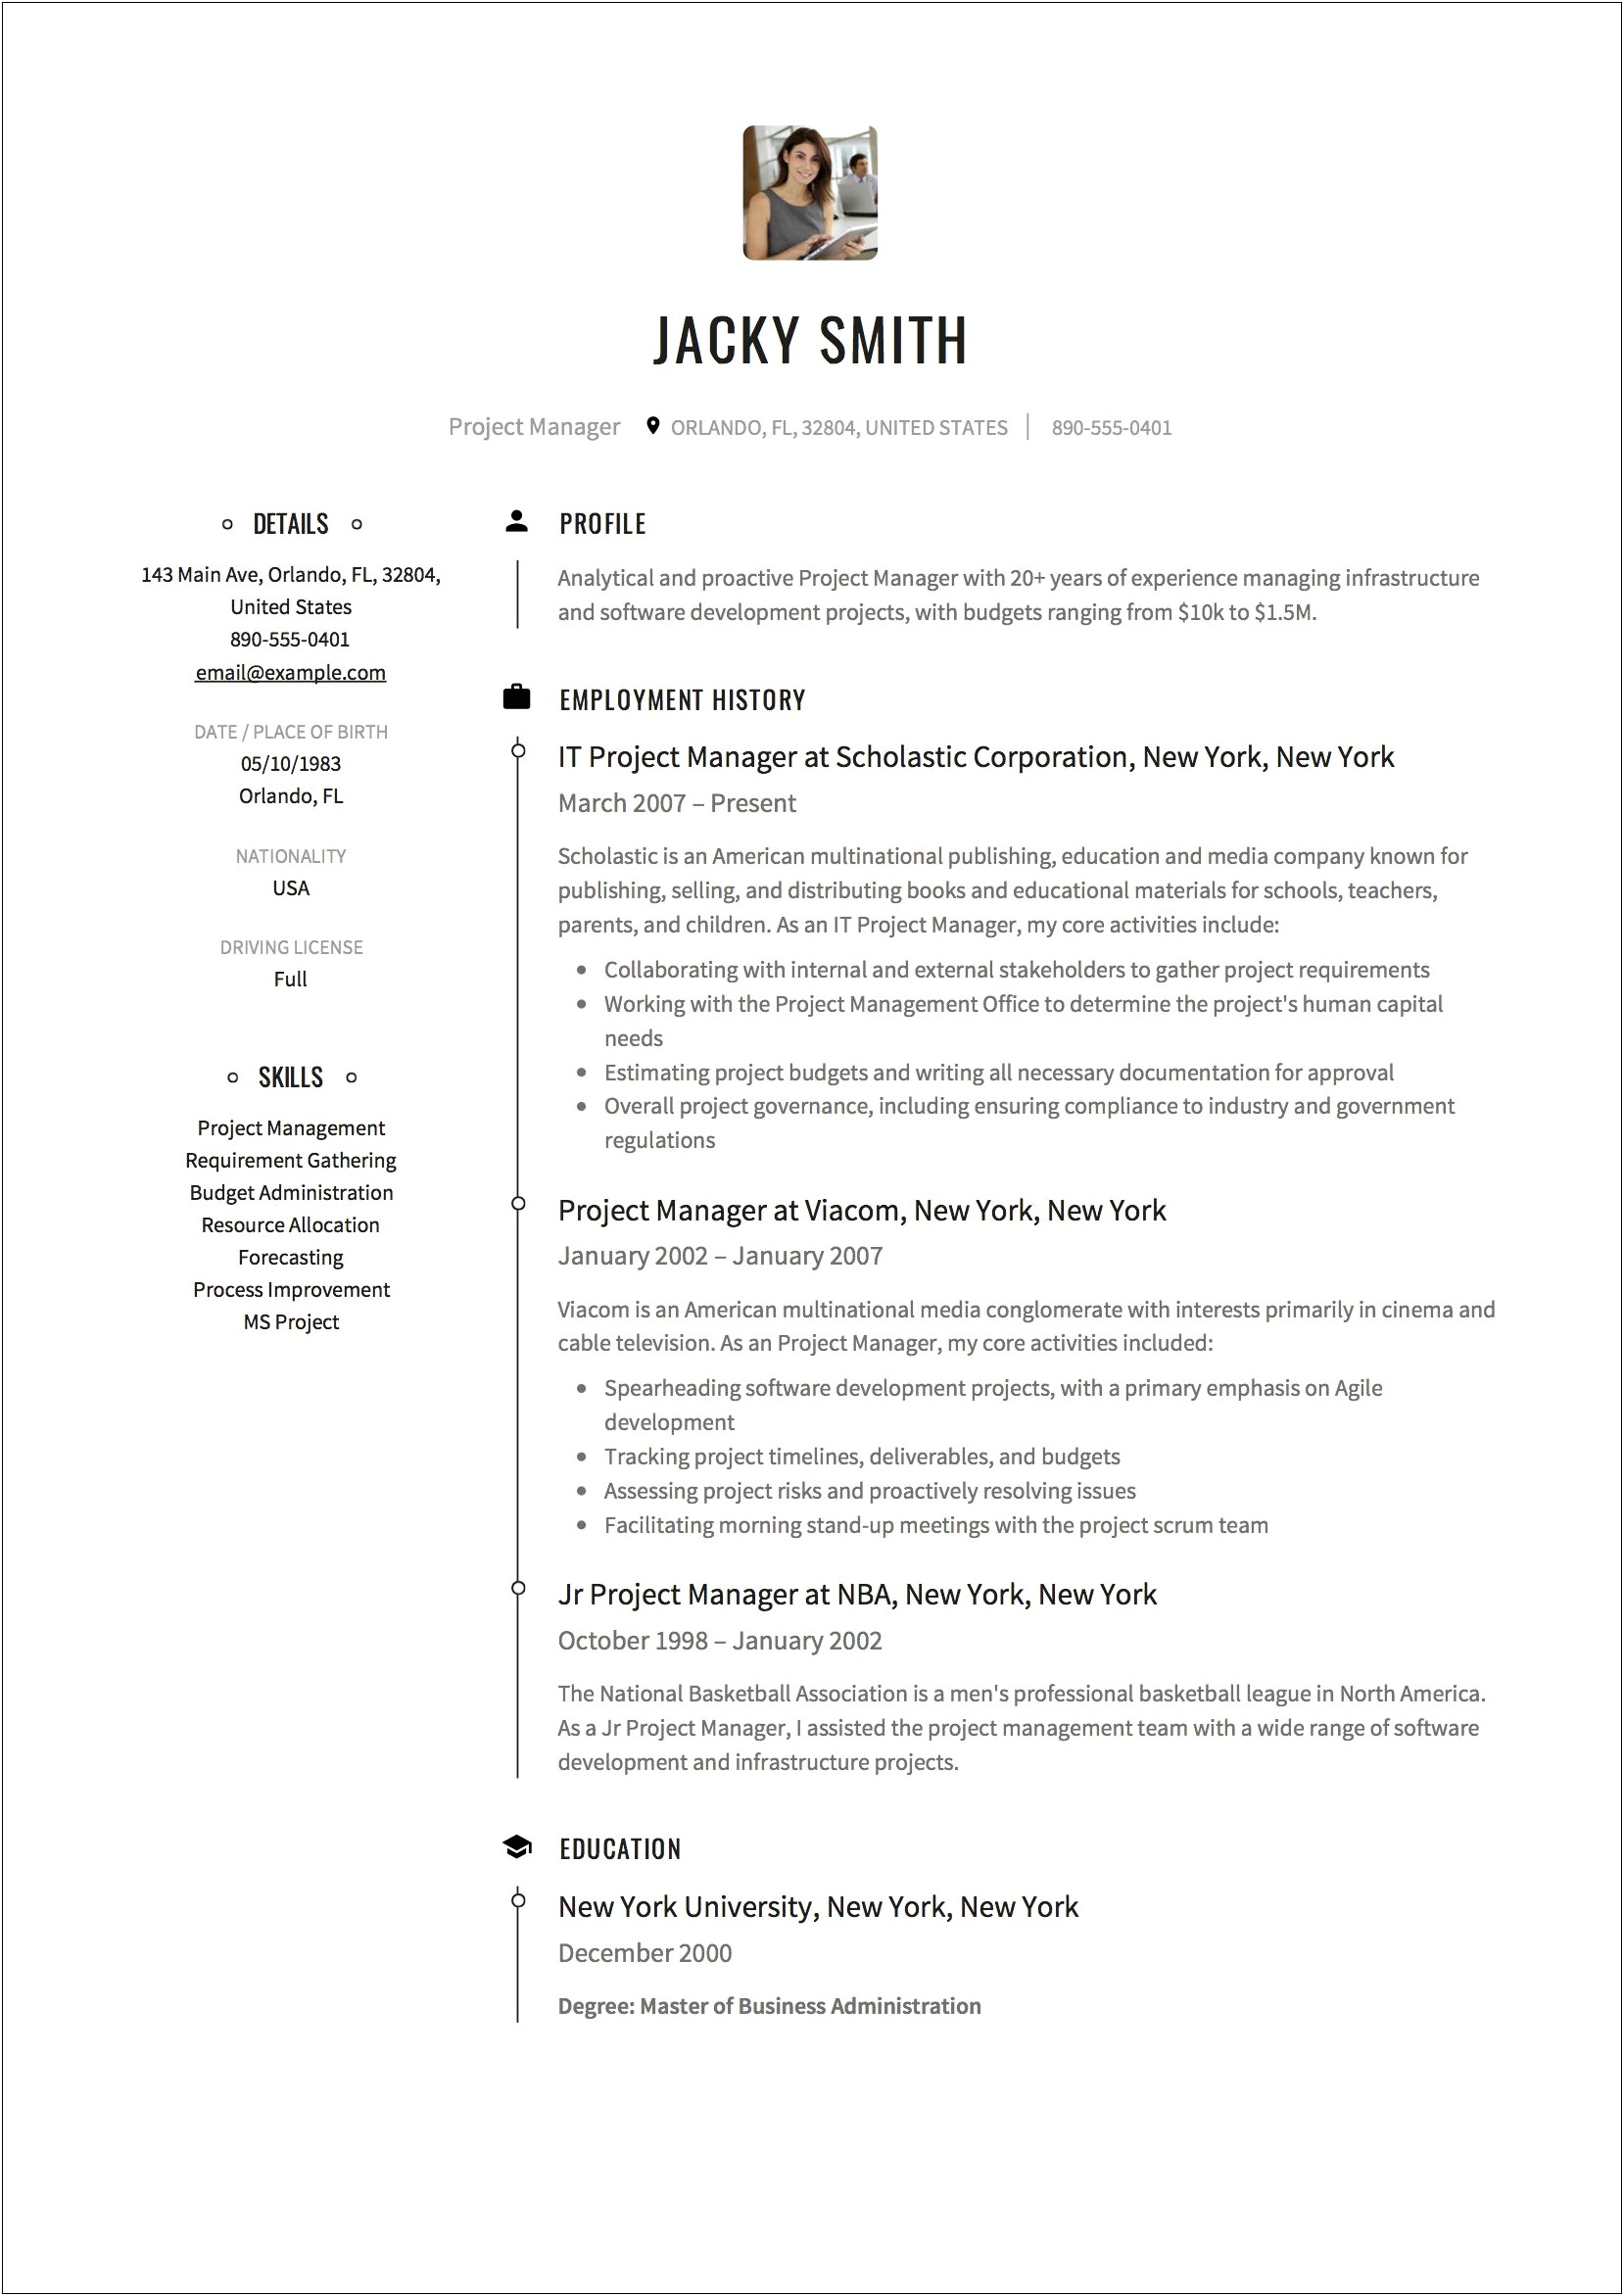 Senior Project Manager Resume Health Care